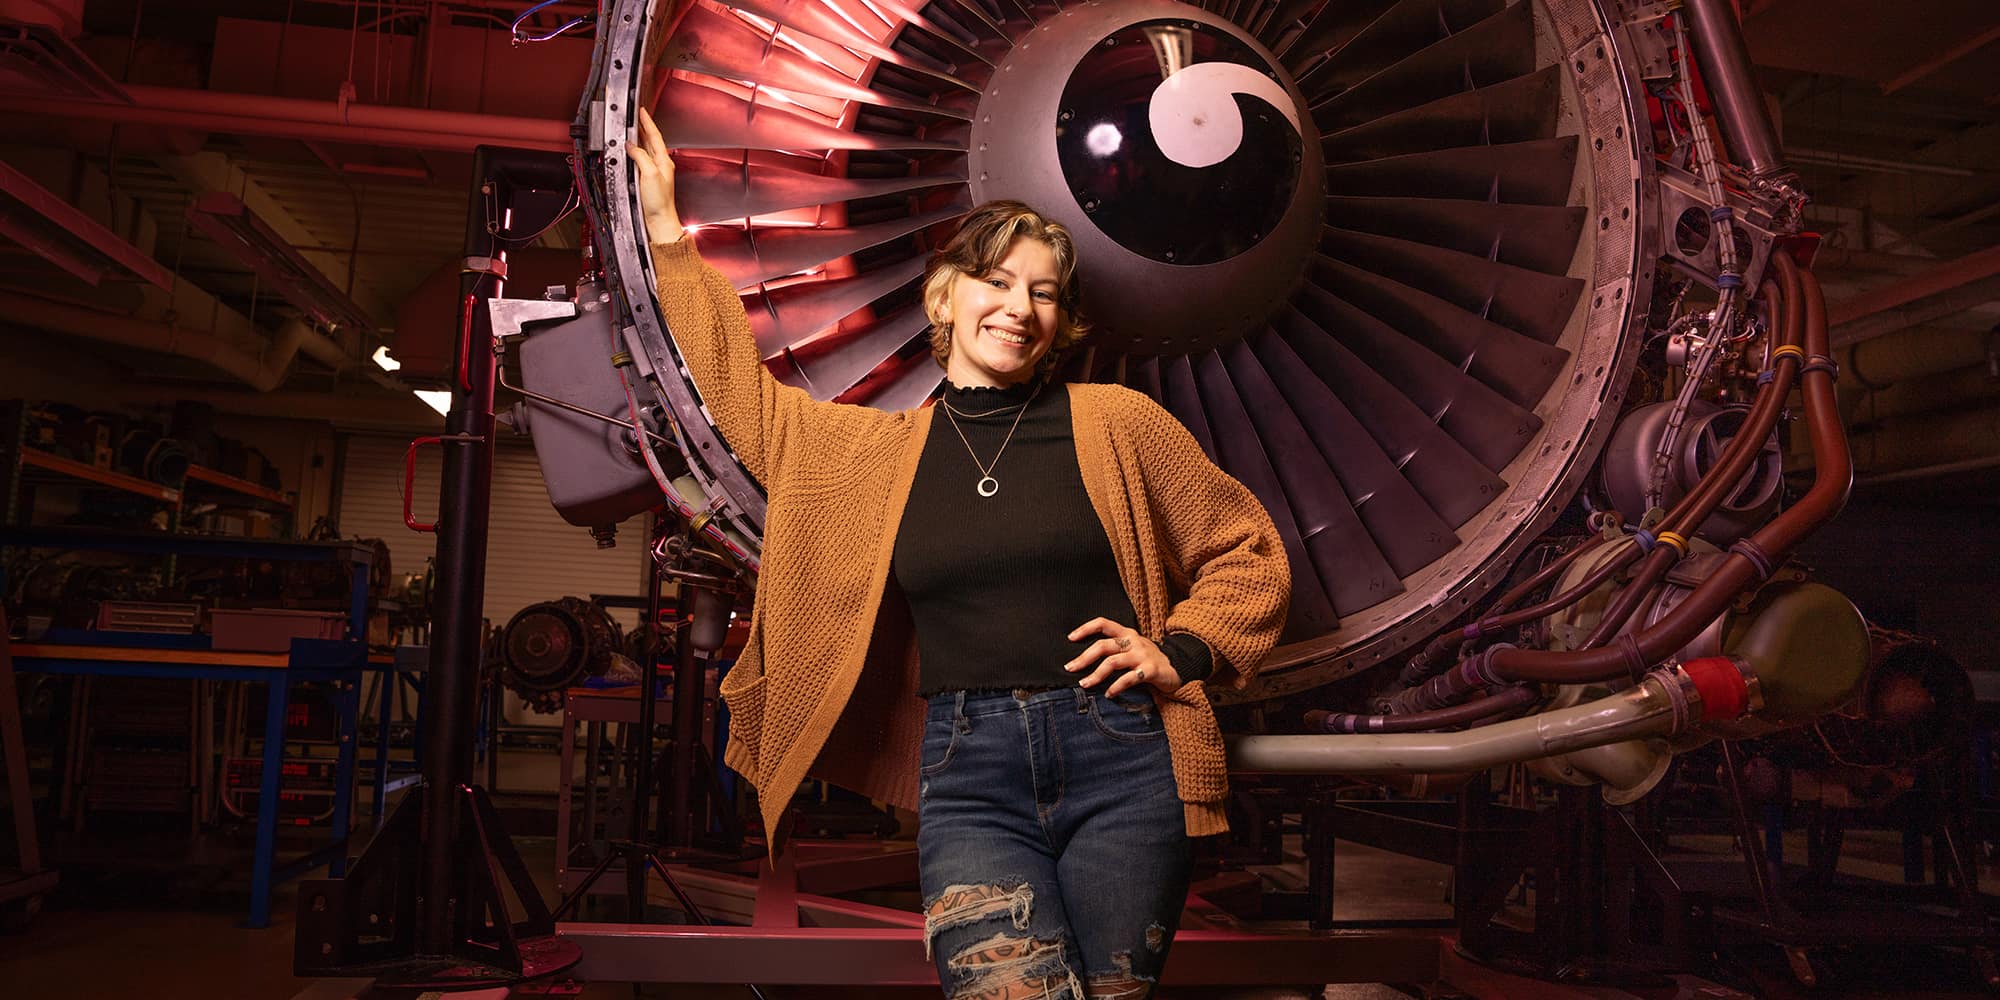 Calen, a woman with light skin tone and short, two-toned hair, stands in a maintenance shop in front of a large engine fan.